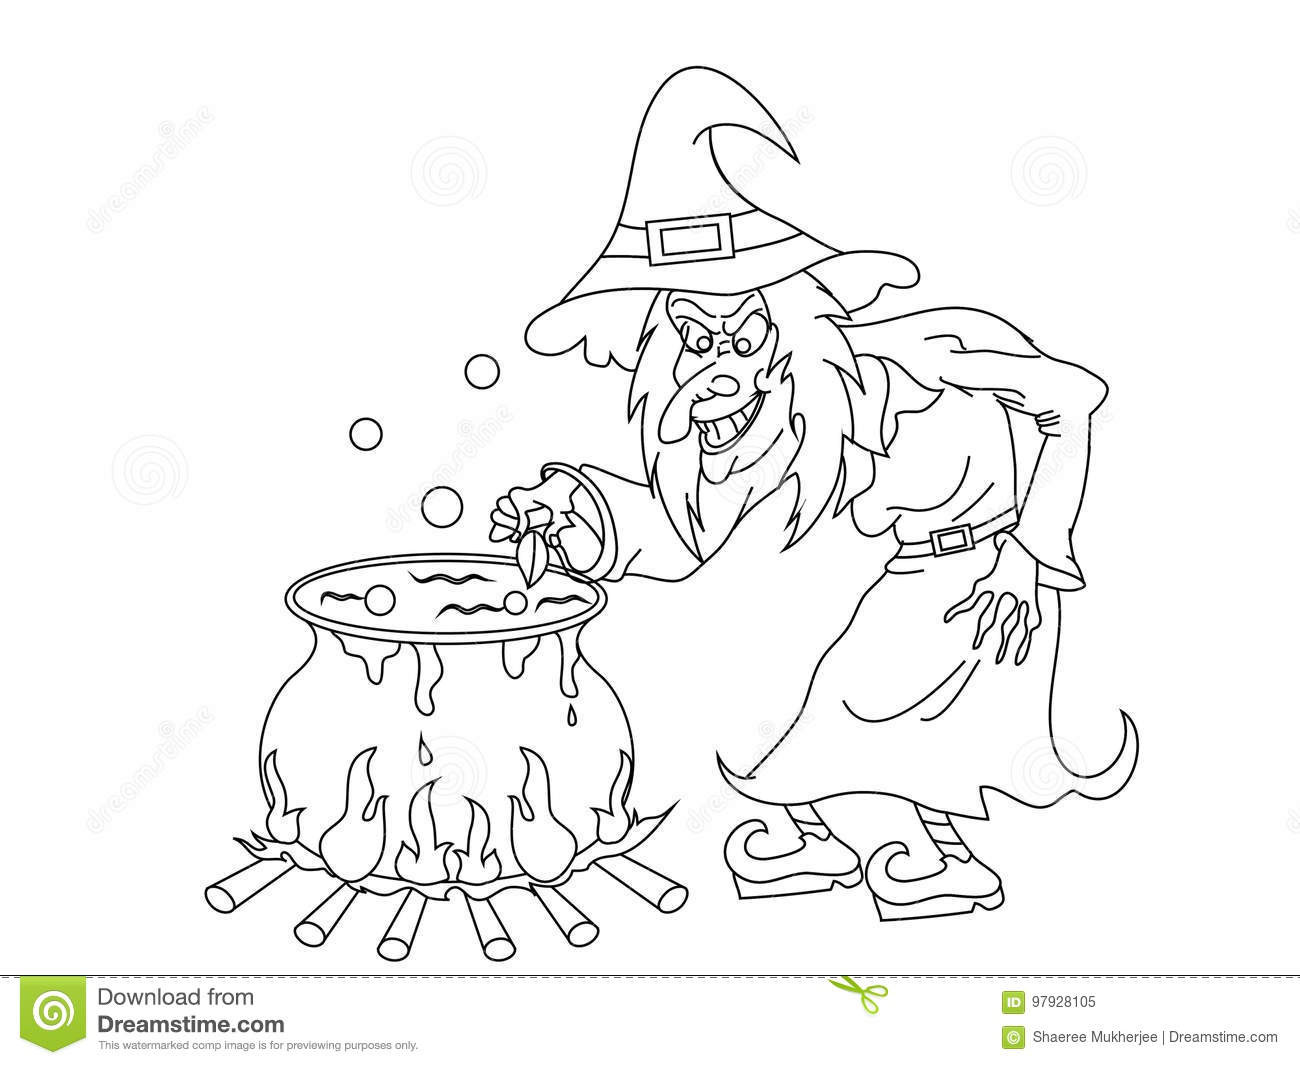 Boys From Witch Cartoon Coloring Pages
 Cartoon Halloween Witch With Cauldron Coloring Page Stock